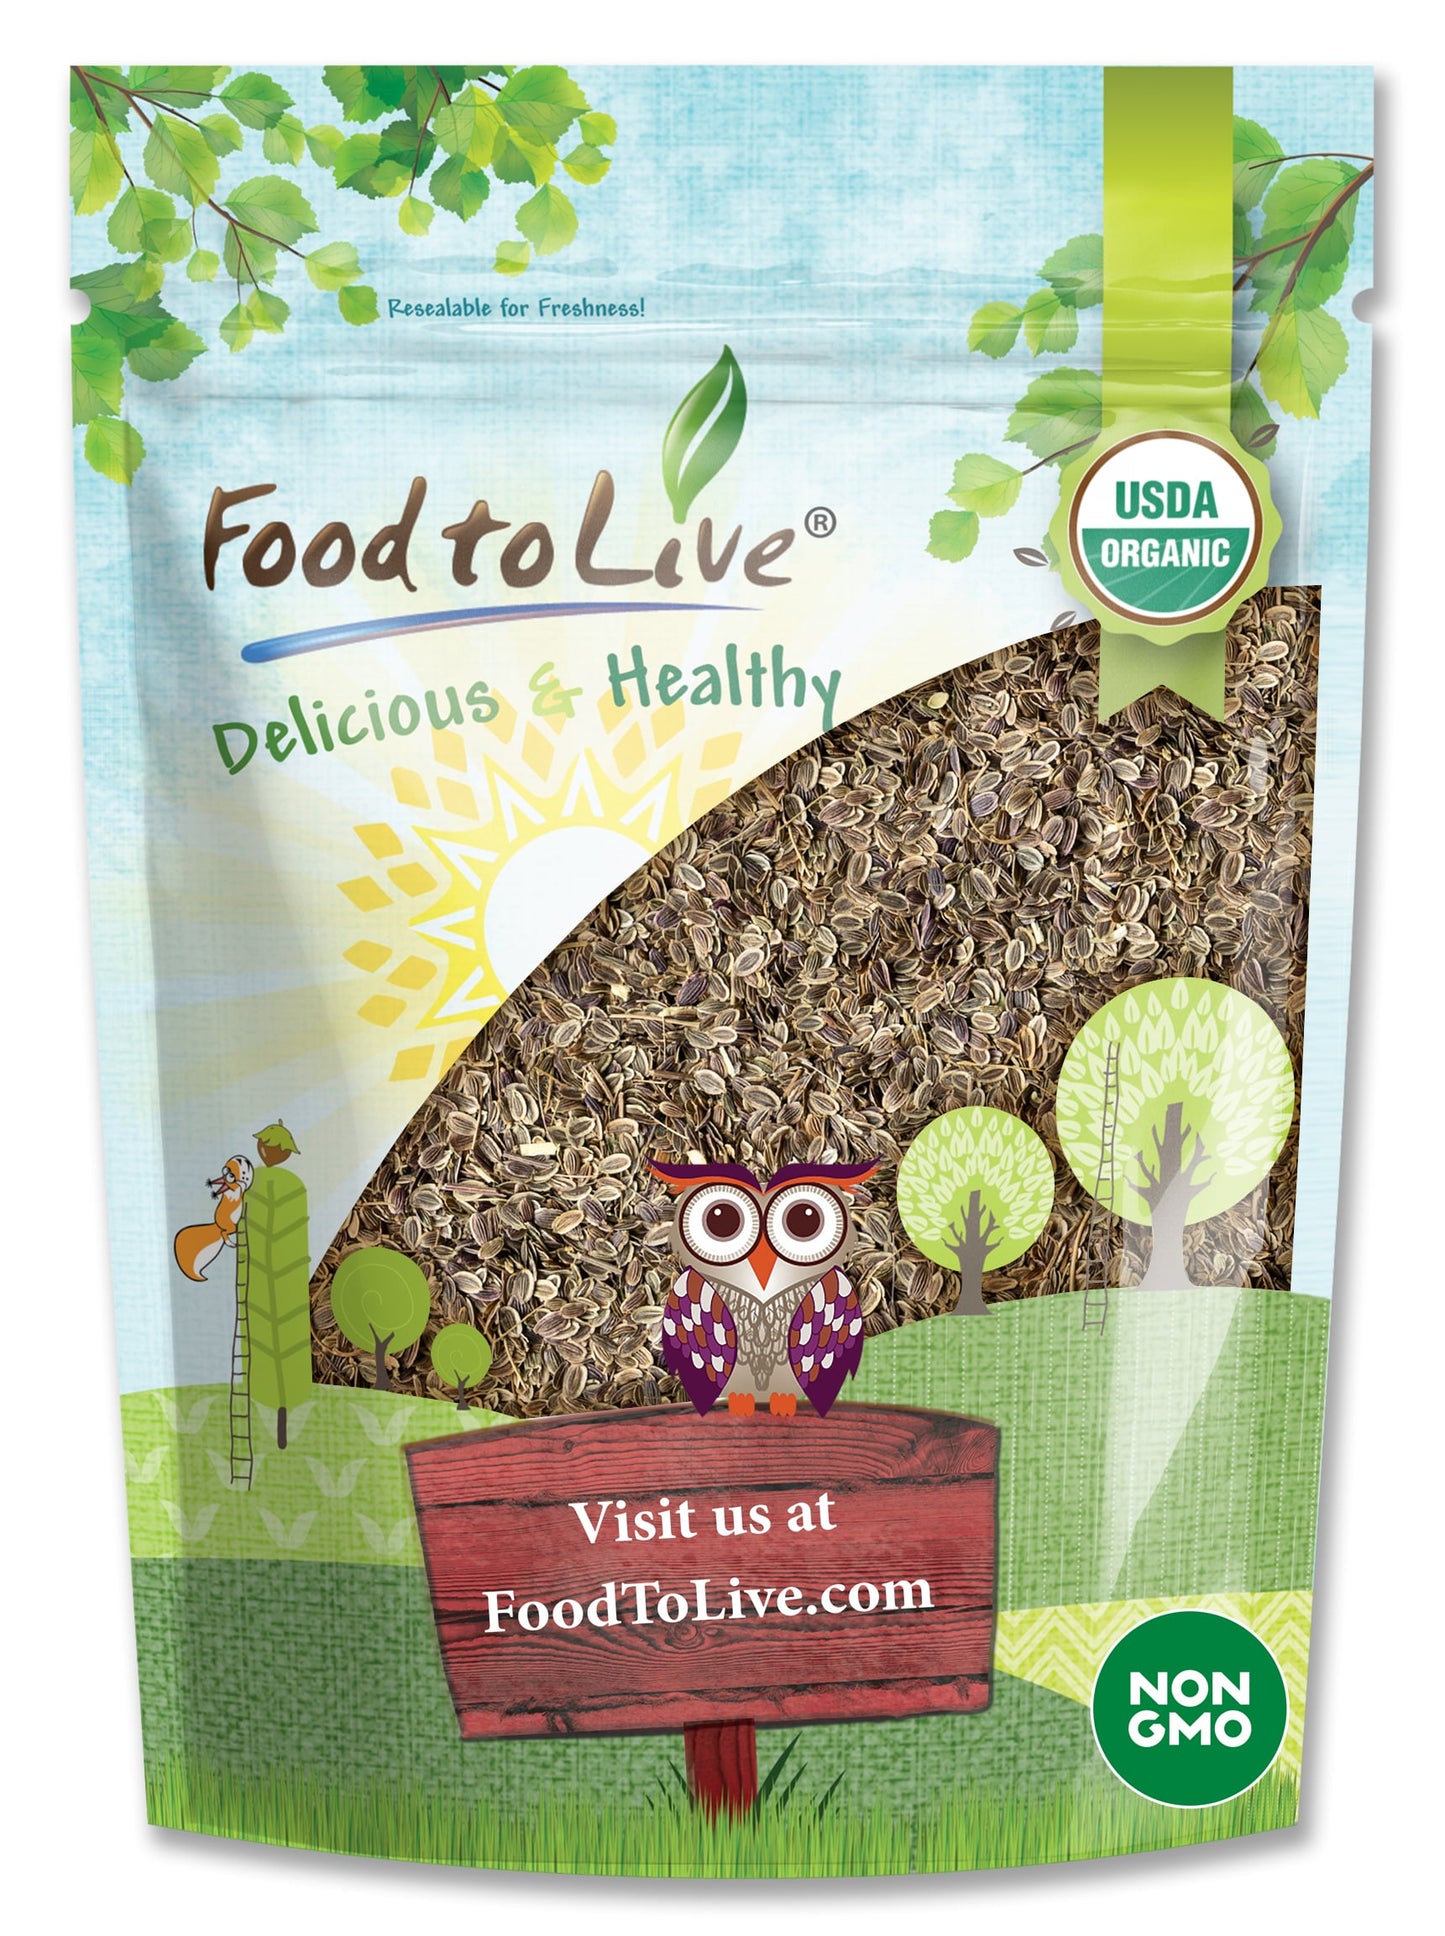 Organic Dill Seeds - Whole, Non-GMO Spice, Vegan, Dry, Bulk, Perfect for Curry - by Food to Live